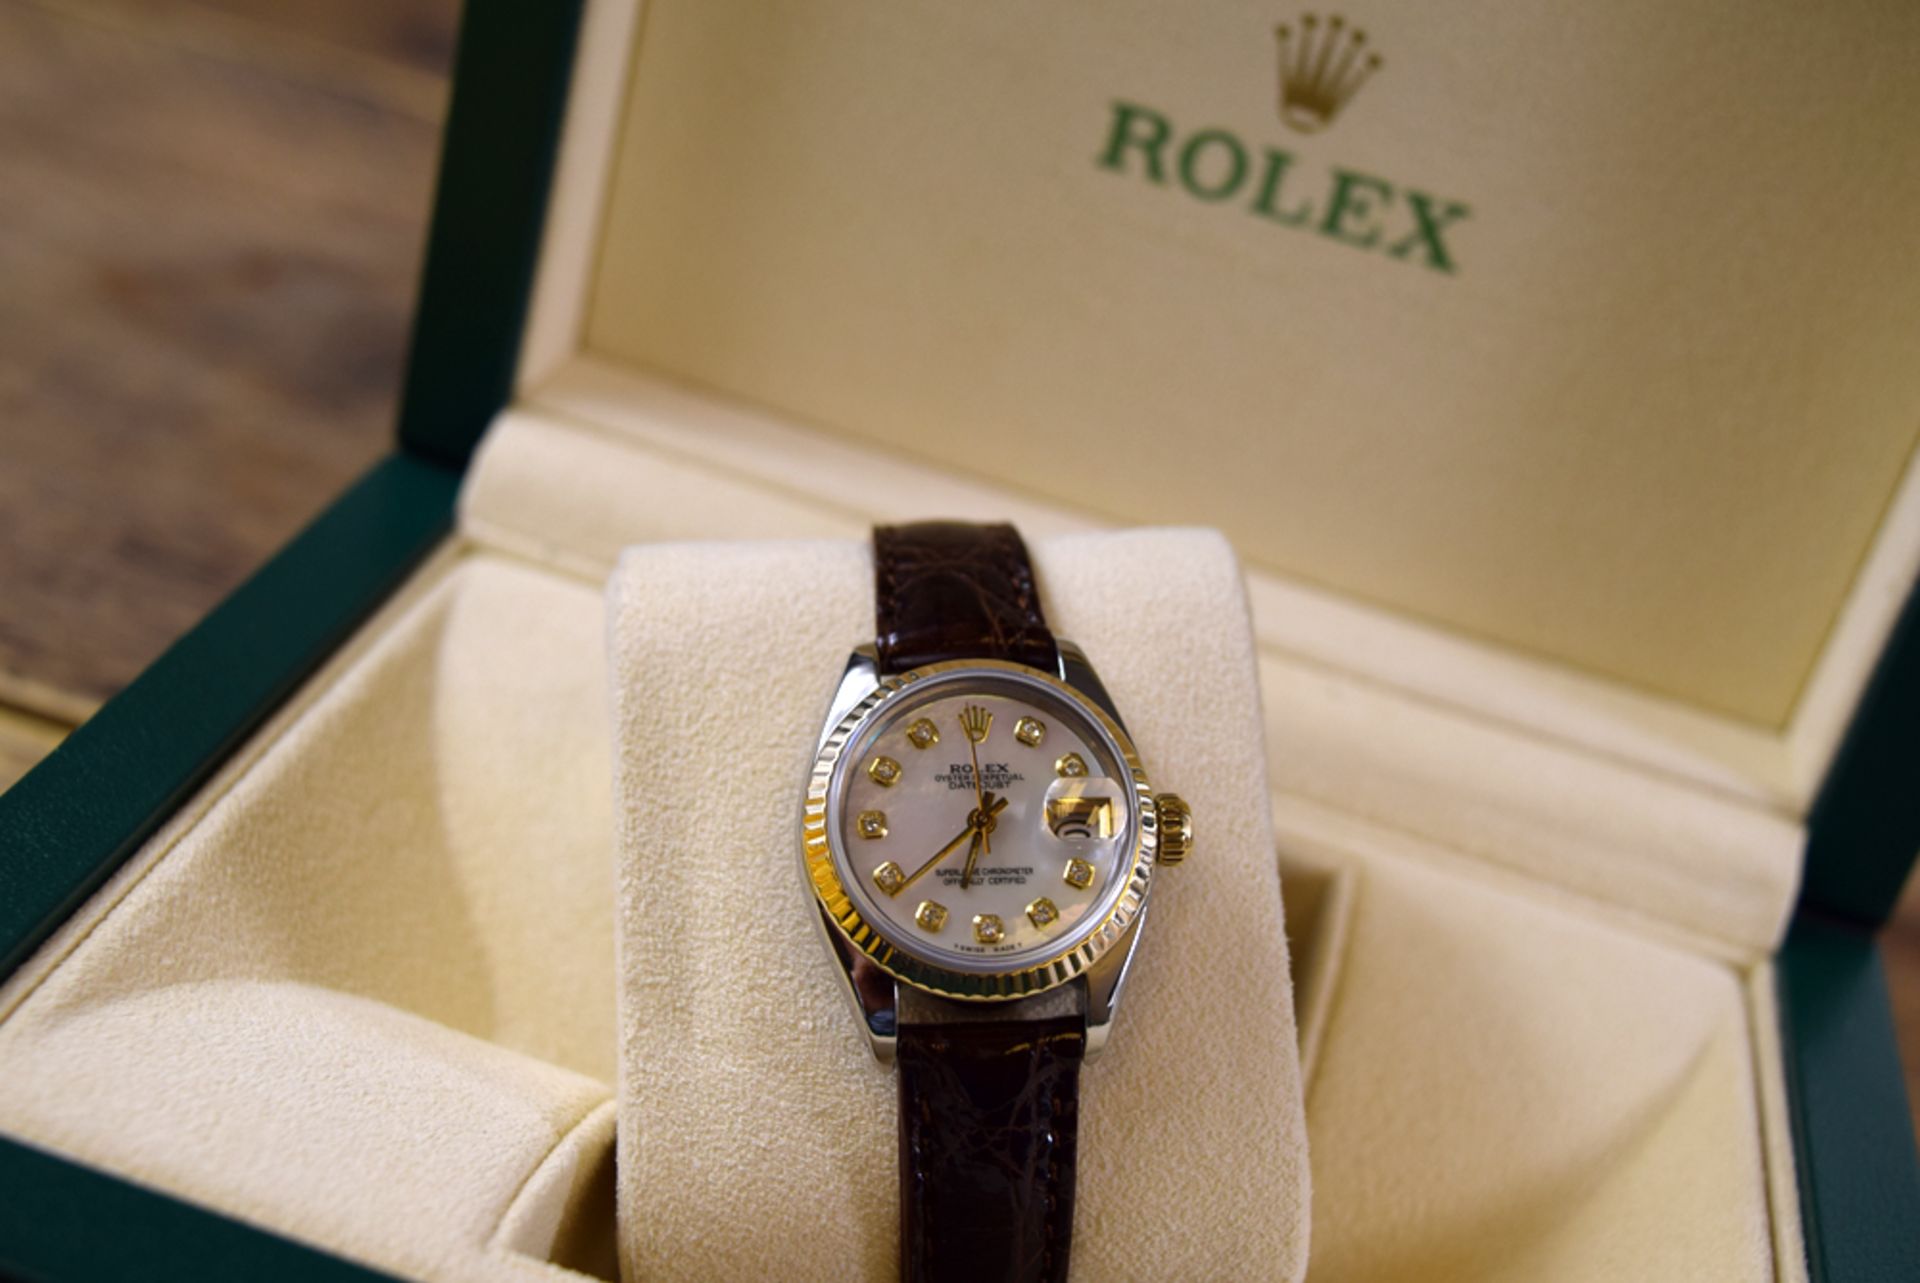 ROLEX - 18K GOLD & STEEL LADY DATEJUST - MOP *DIAMOND* DIAL! - Image 2 of 9